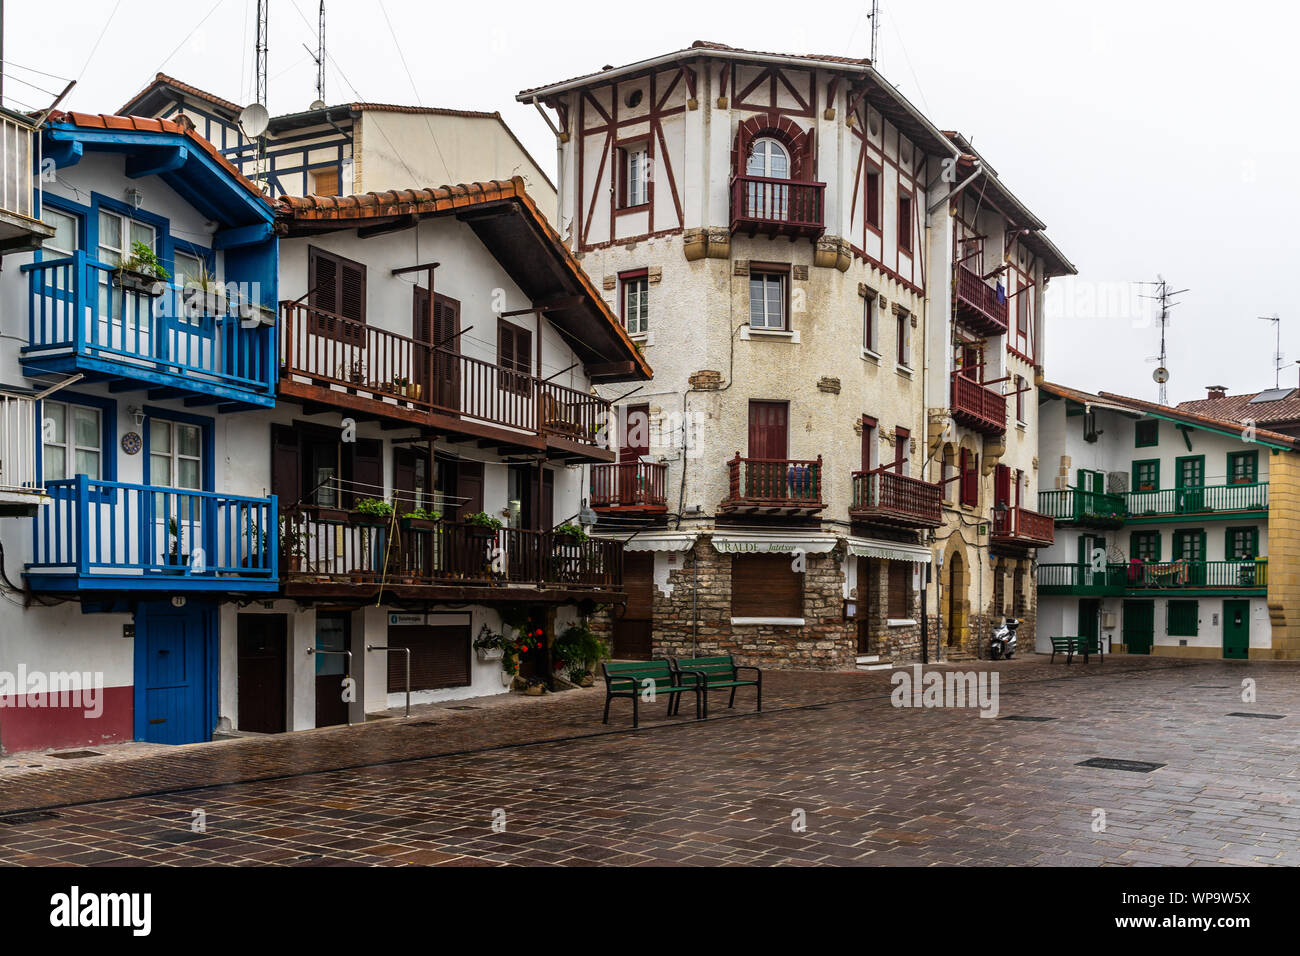 Picturesque square in Hondarribia, a typical Basque town near French border. Hondarribia, Basque Country, Gipuzkoa, Spain, January 2019 Stock Photo